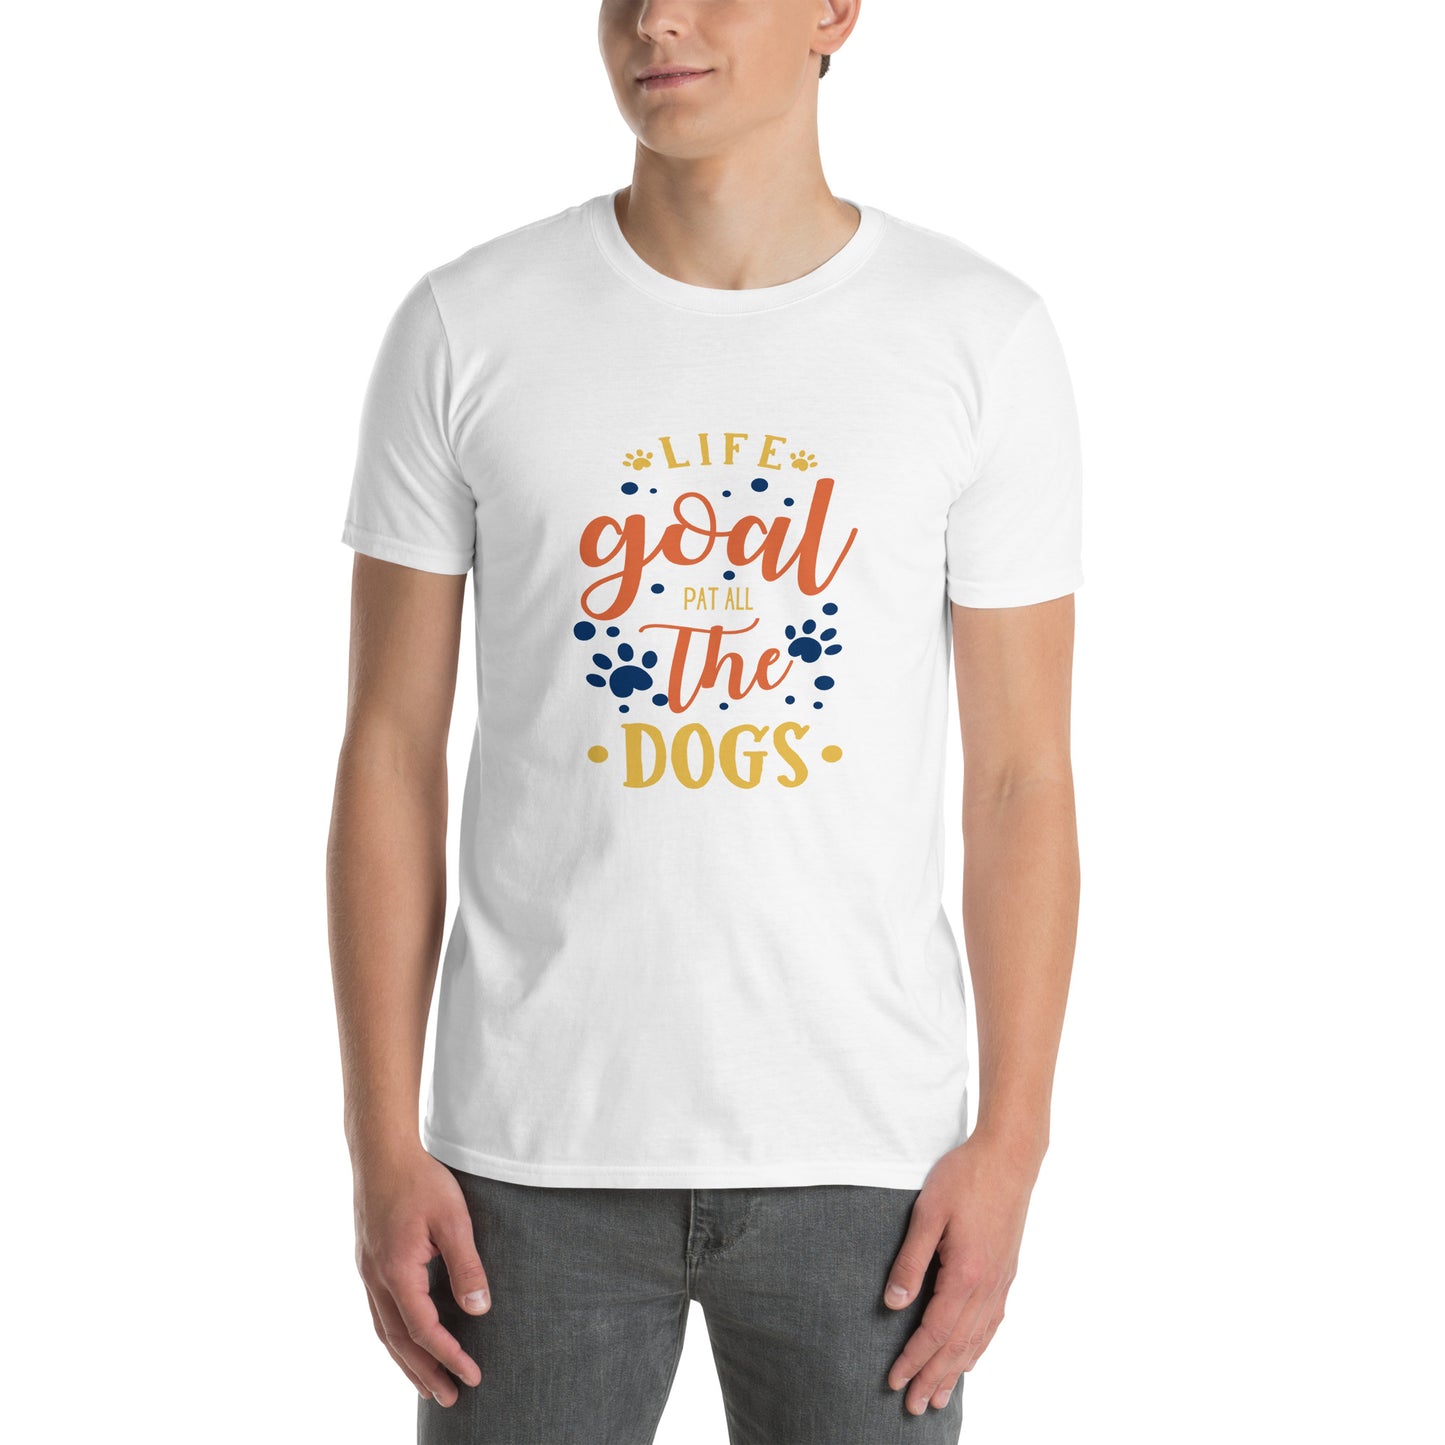 Pat All The Dogs Unisex T-Shirt